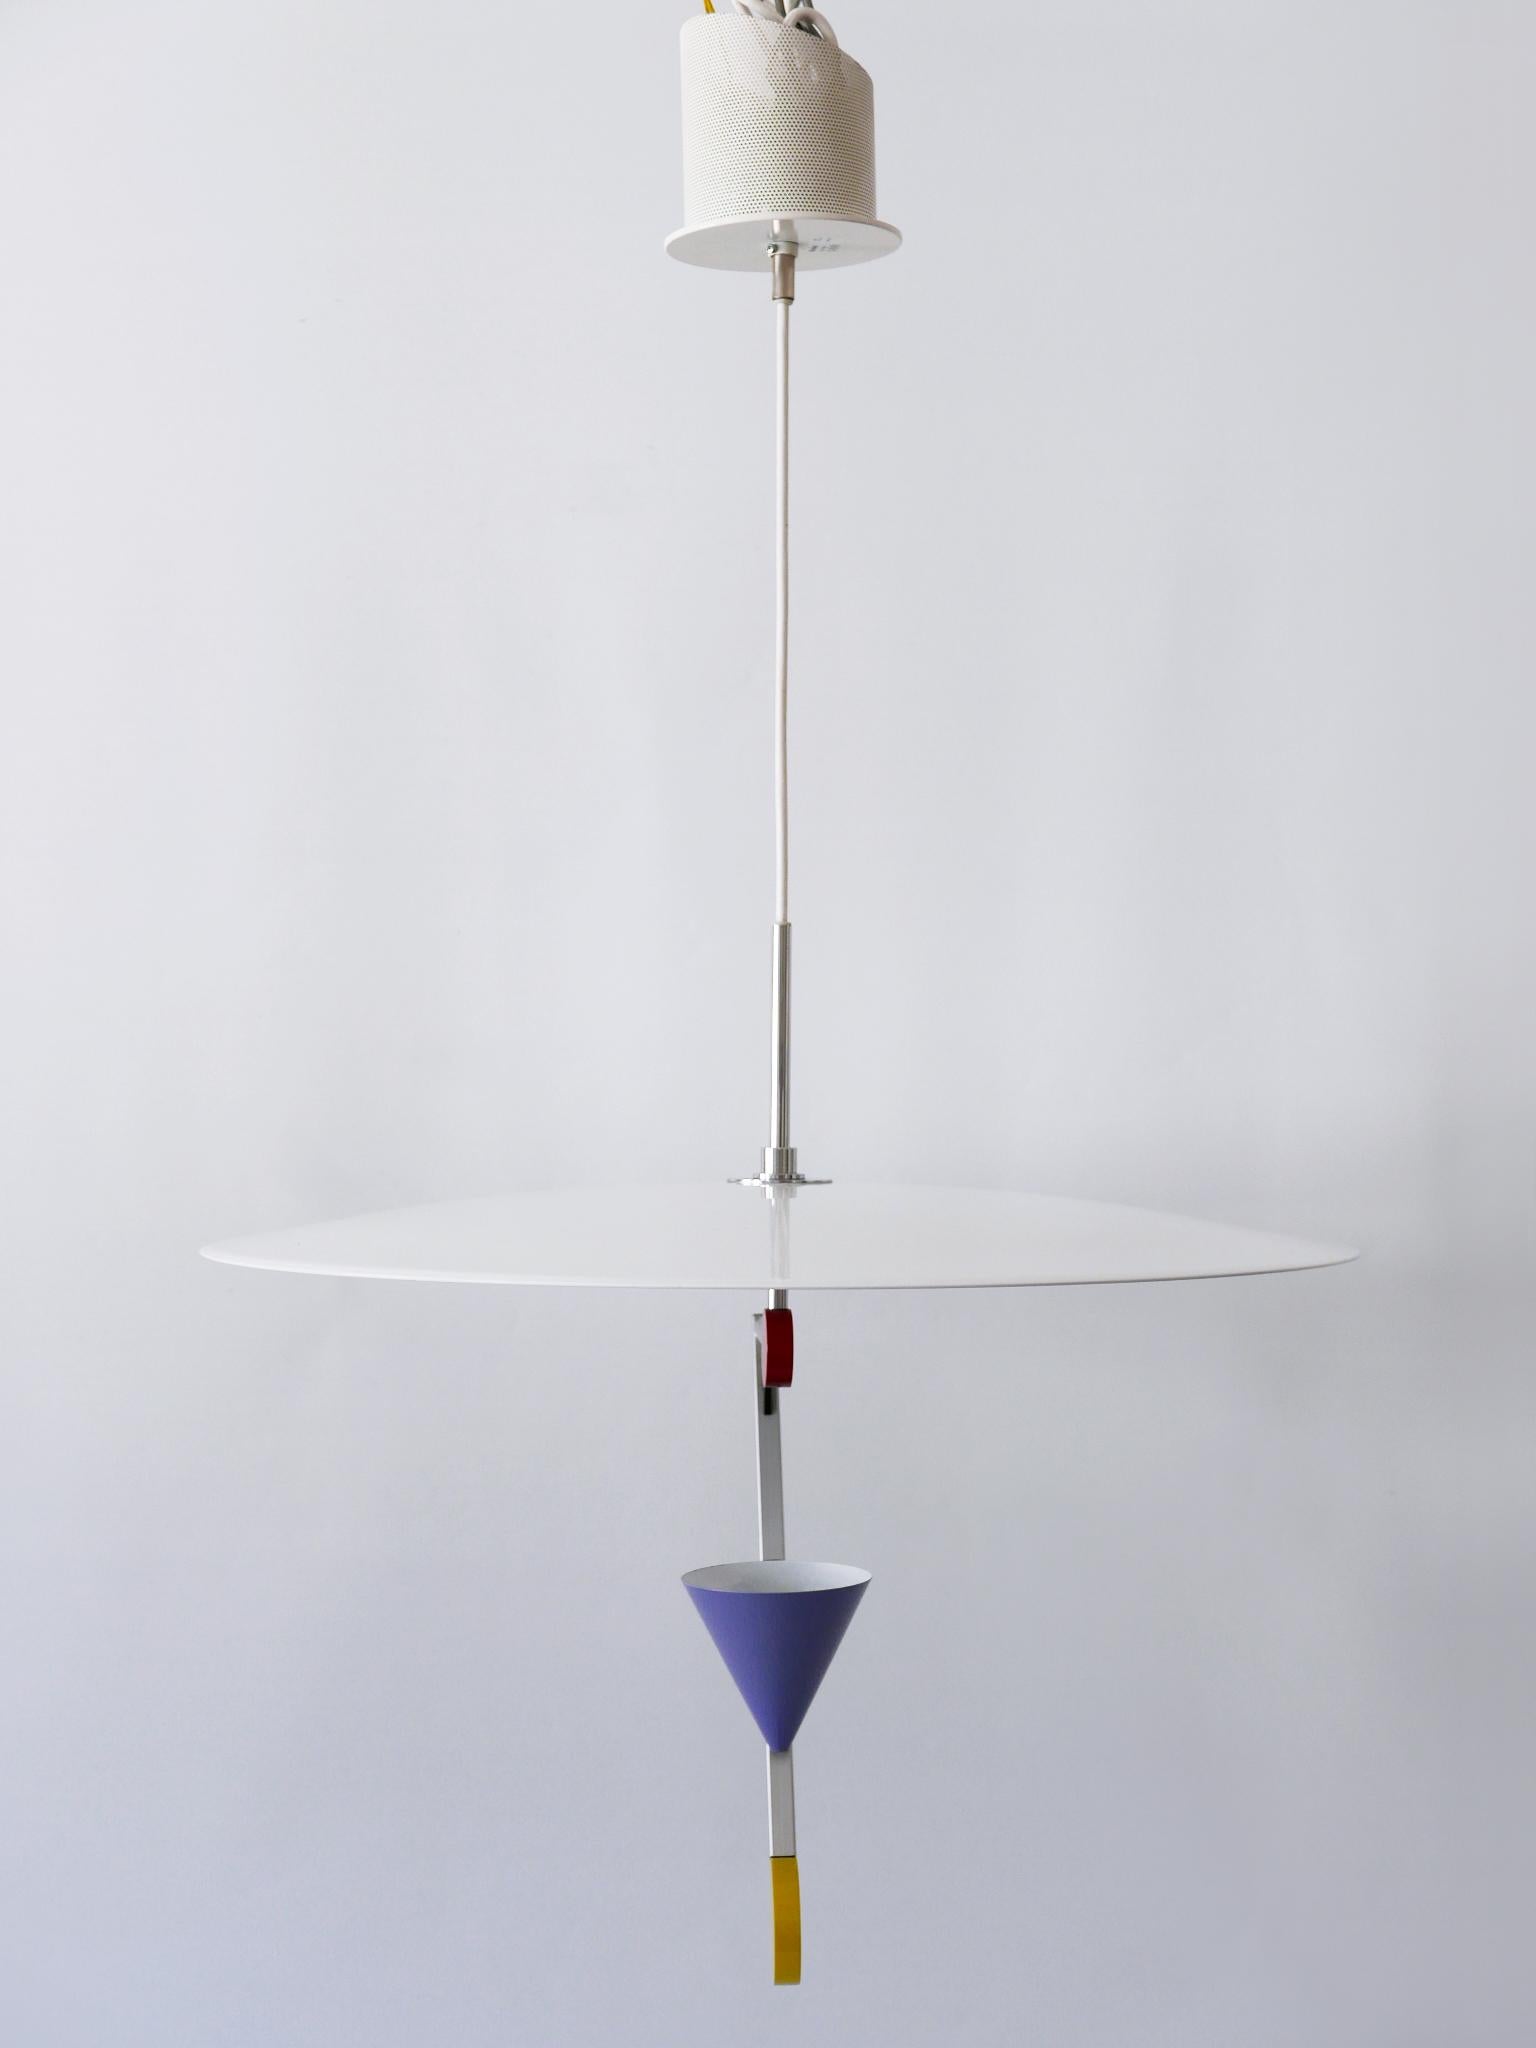 Incroyables lampes suspendues postmodernes Halo There d'Olle Andersson pour Borens 1982 en vente 1